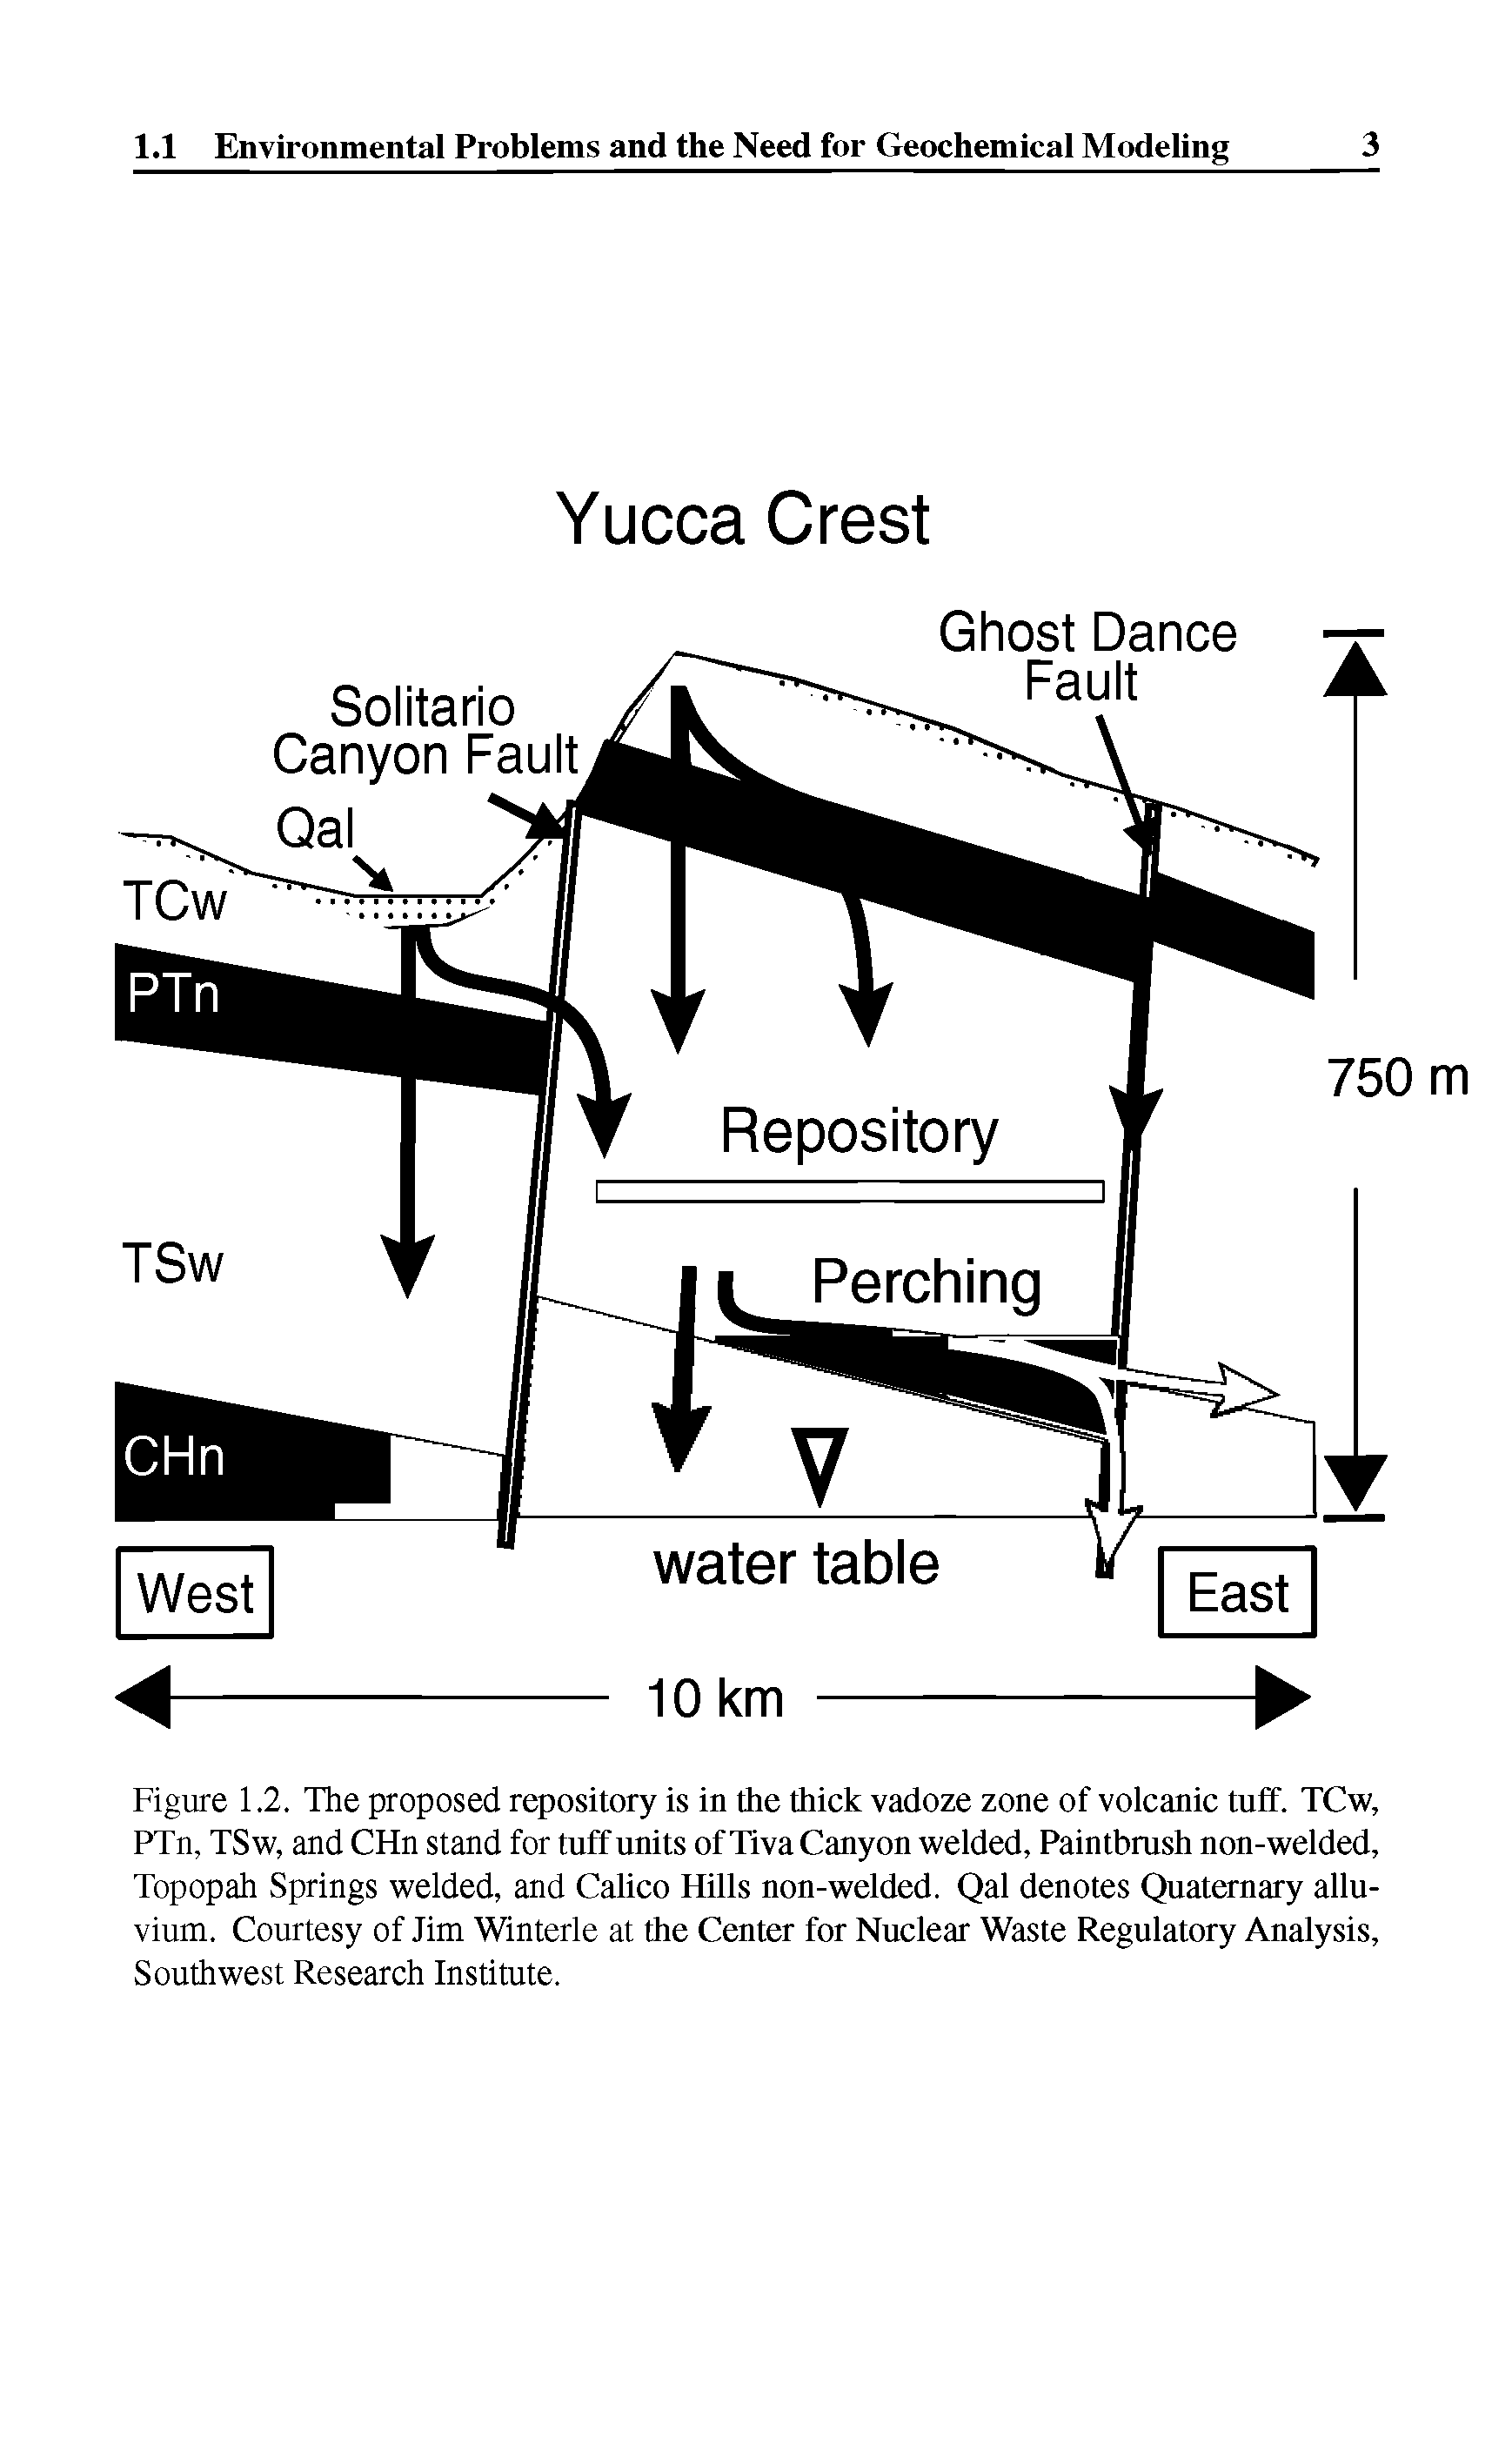 Figure 1.2. The proposed repository is in the thick vadoze zone of volcanic tuff. TCw, PTn, TSw, and CHn stand for tuff units of Tiva Canyon welded, Paintbrush non-welded, Topopah Springs welded, and Calico Hills non-welded. Qal denotes Quaternary alluvium. Courtesy of Jim Winterle at the Center for Nuclear Waste Regulatory Analysis, Southwest Research Institute.